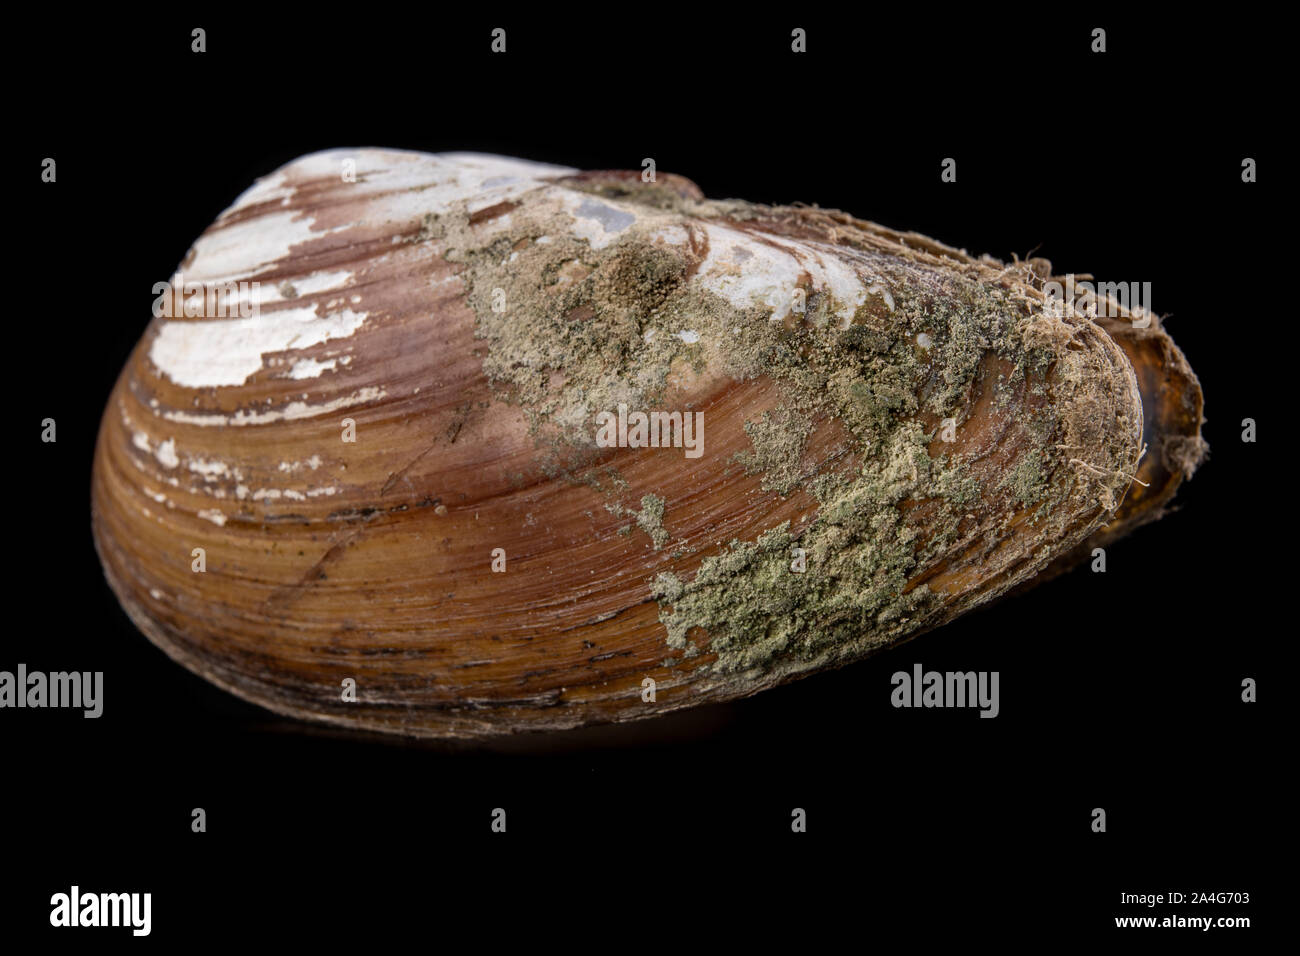 Anodonta Anatina empty shell. A clam shell living in the lakes of Central Europe. Dark background. Stock Photo